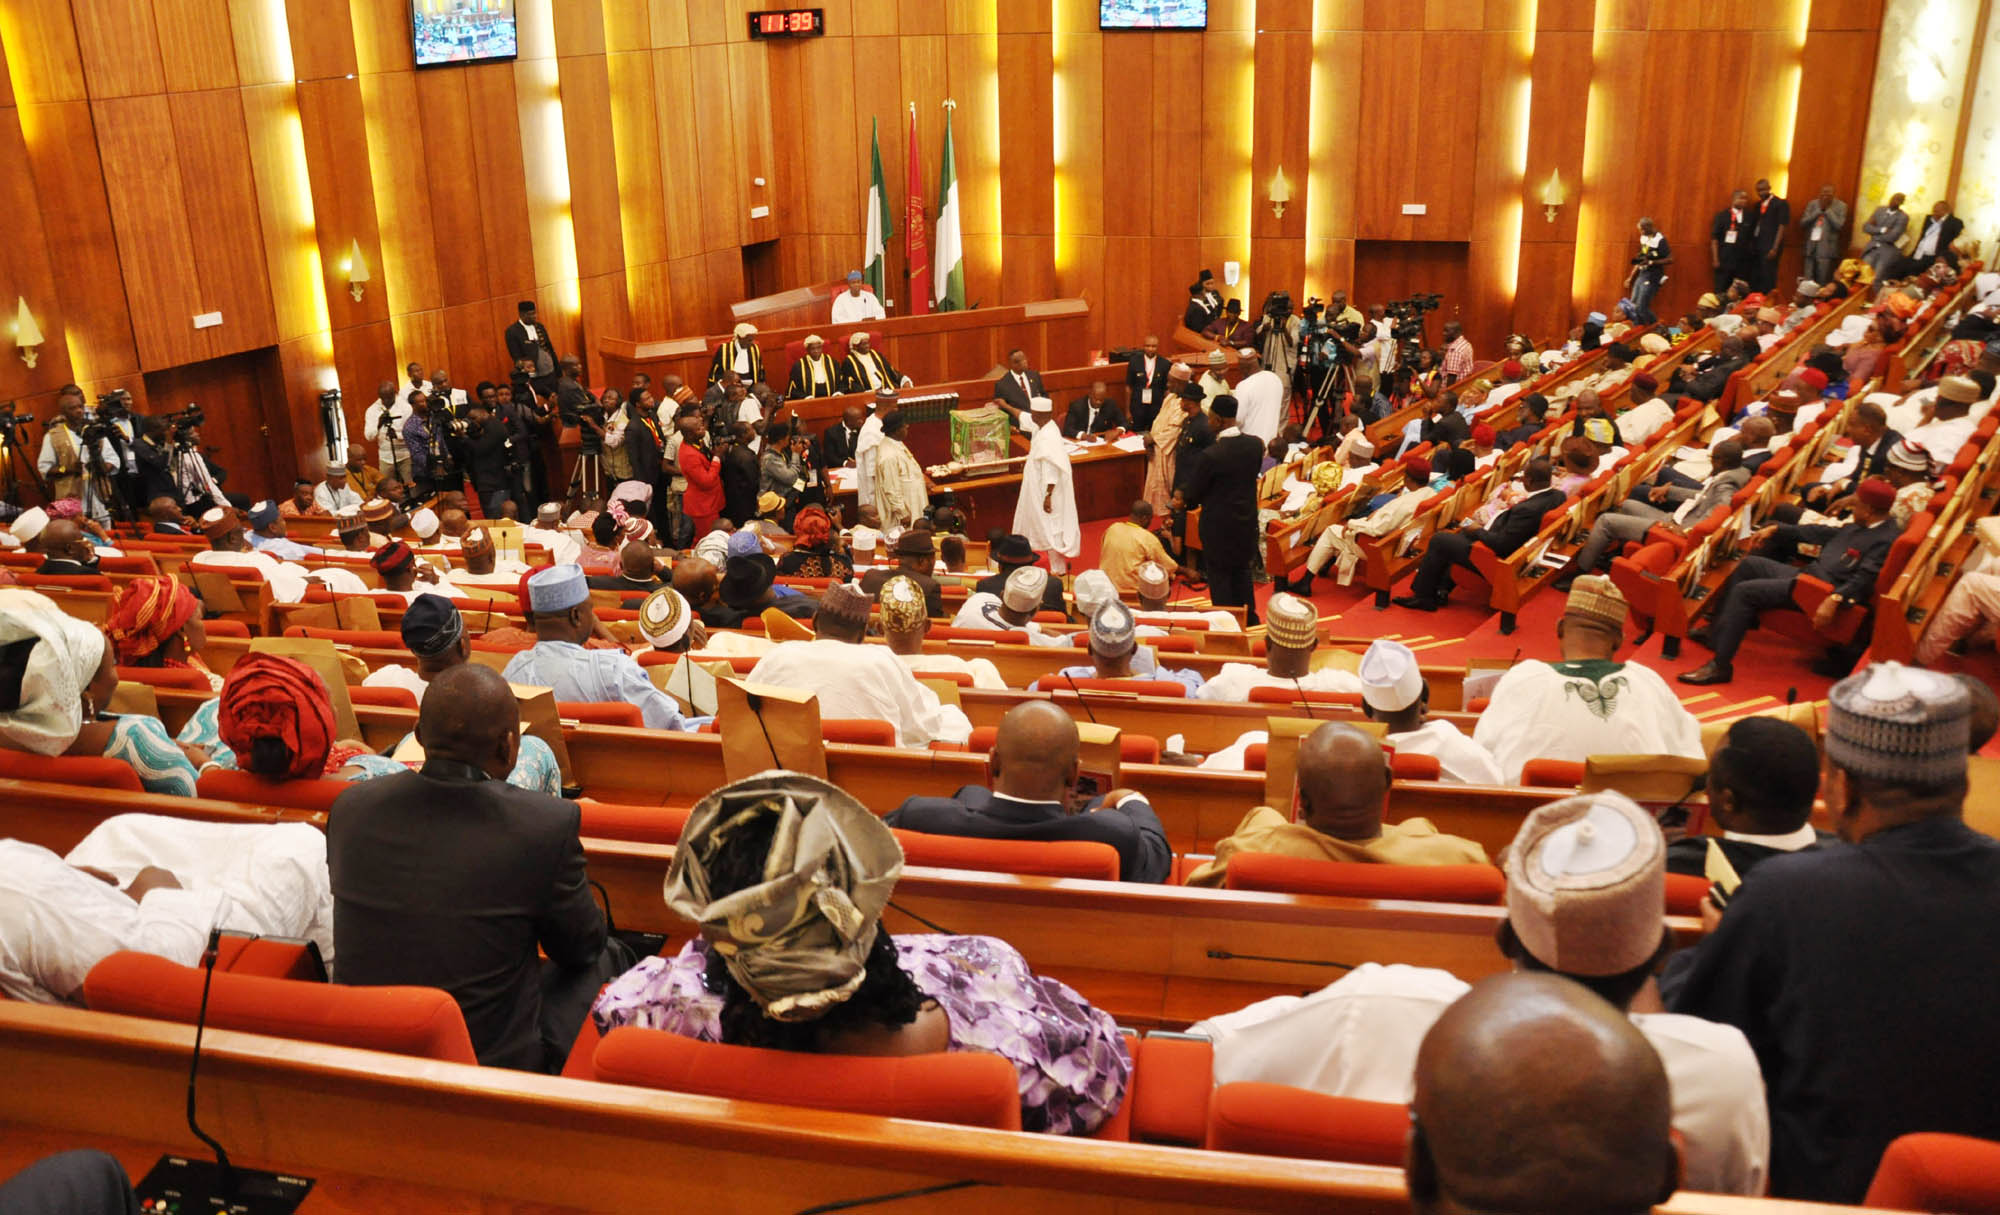 Senate Probes Resumption Of NHRC Boss Without Confirmation